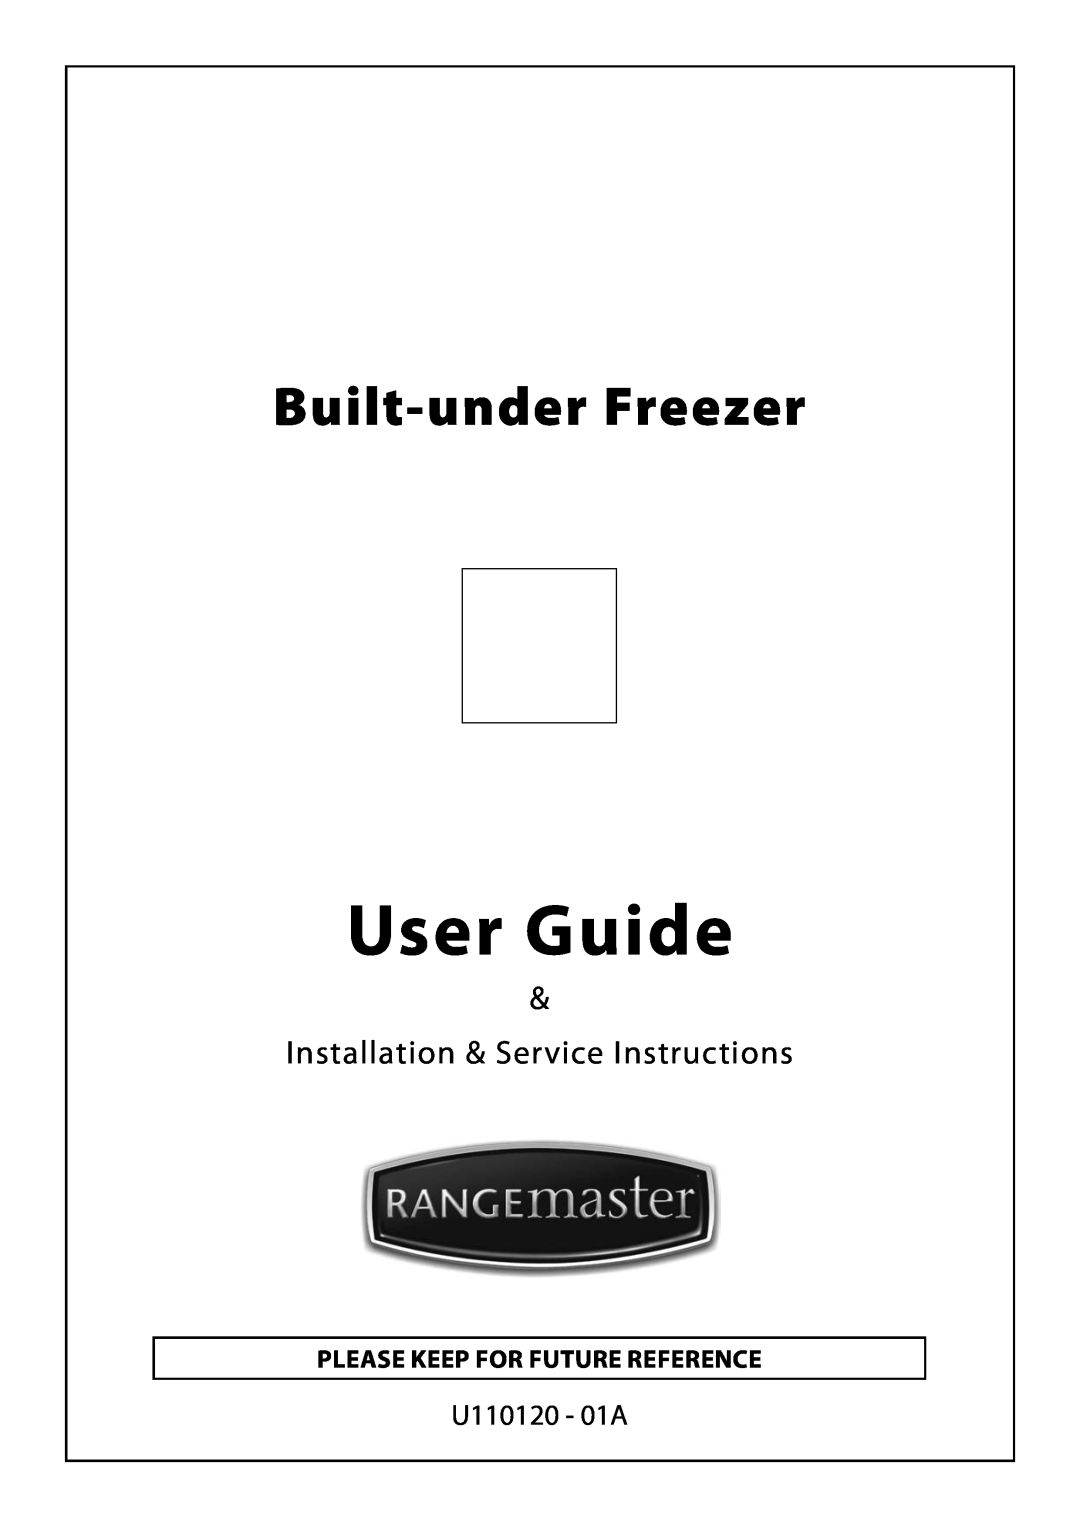 Rangemaster U110120 - 01A manual Please keeP for fUtUre reference, User Guide, Built-under Freezer 